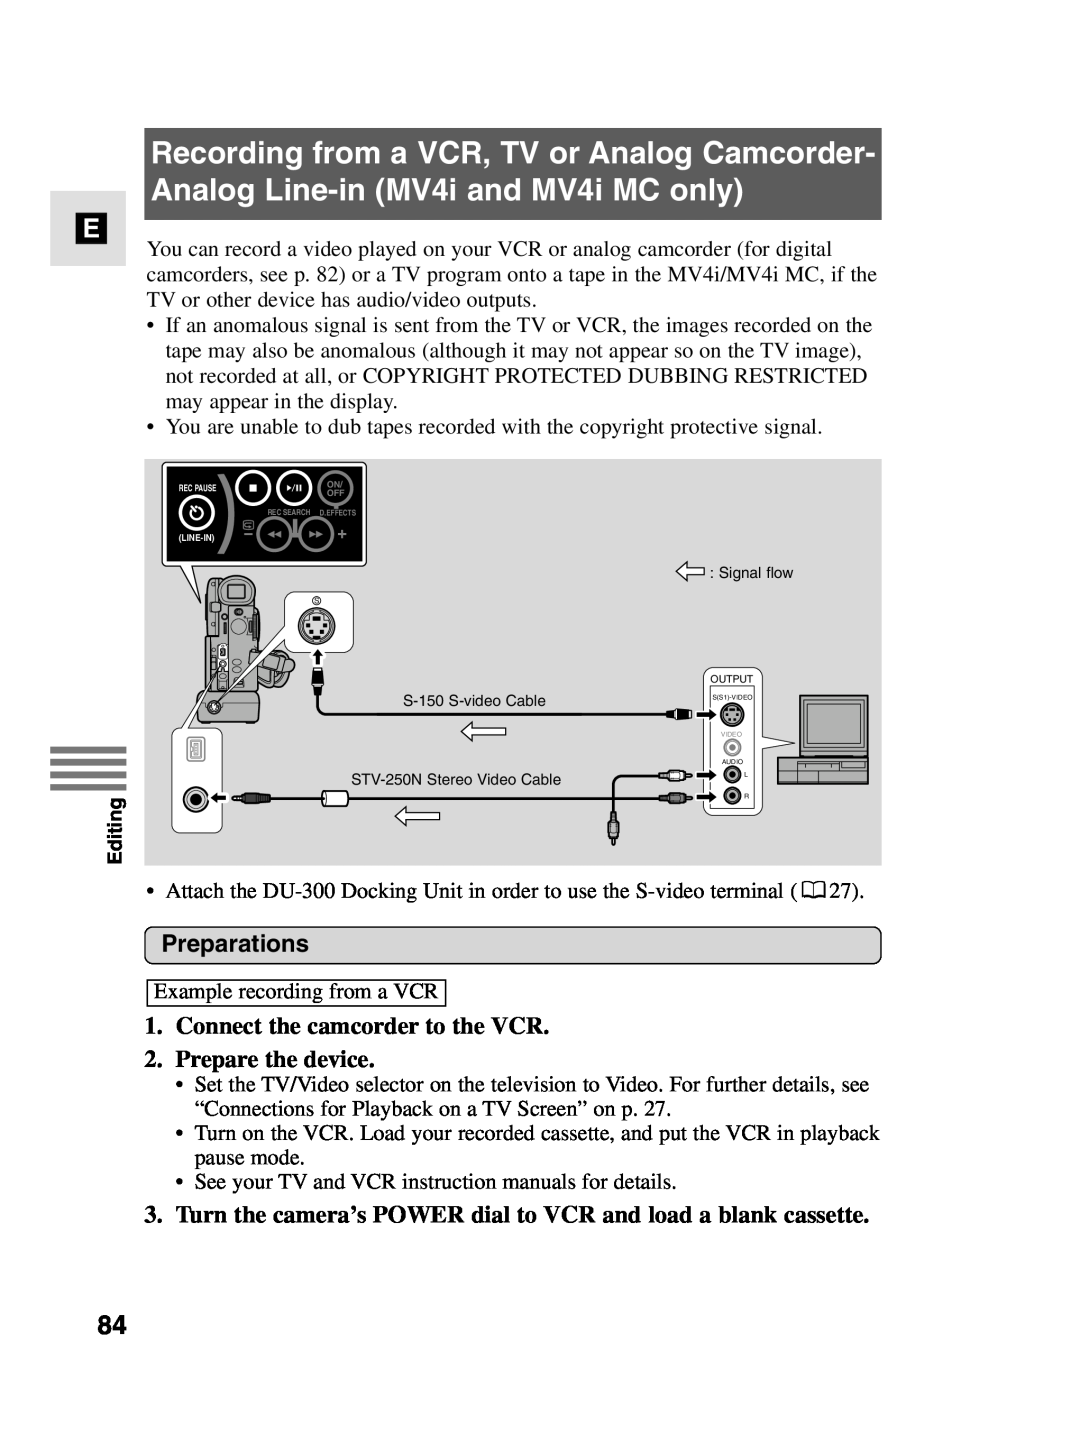 Canon MV4i MC instruction manual Connect the camcorder to the VCR 2. Prepare the device, Output, SS1-VIDEO, Audio L R 